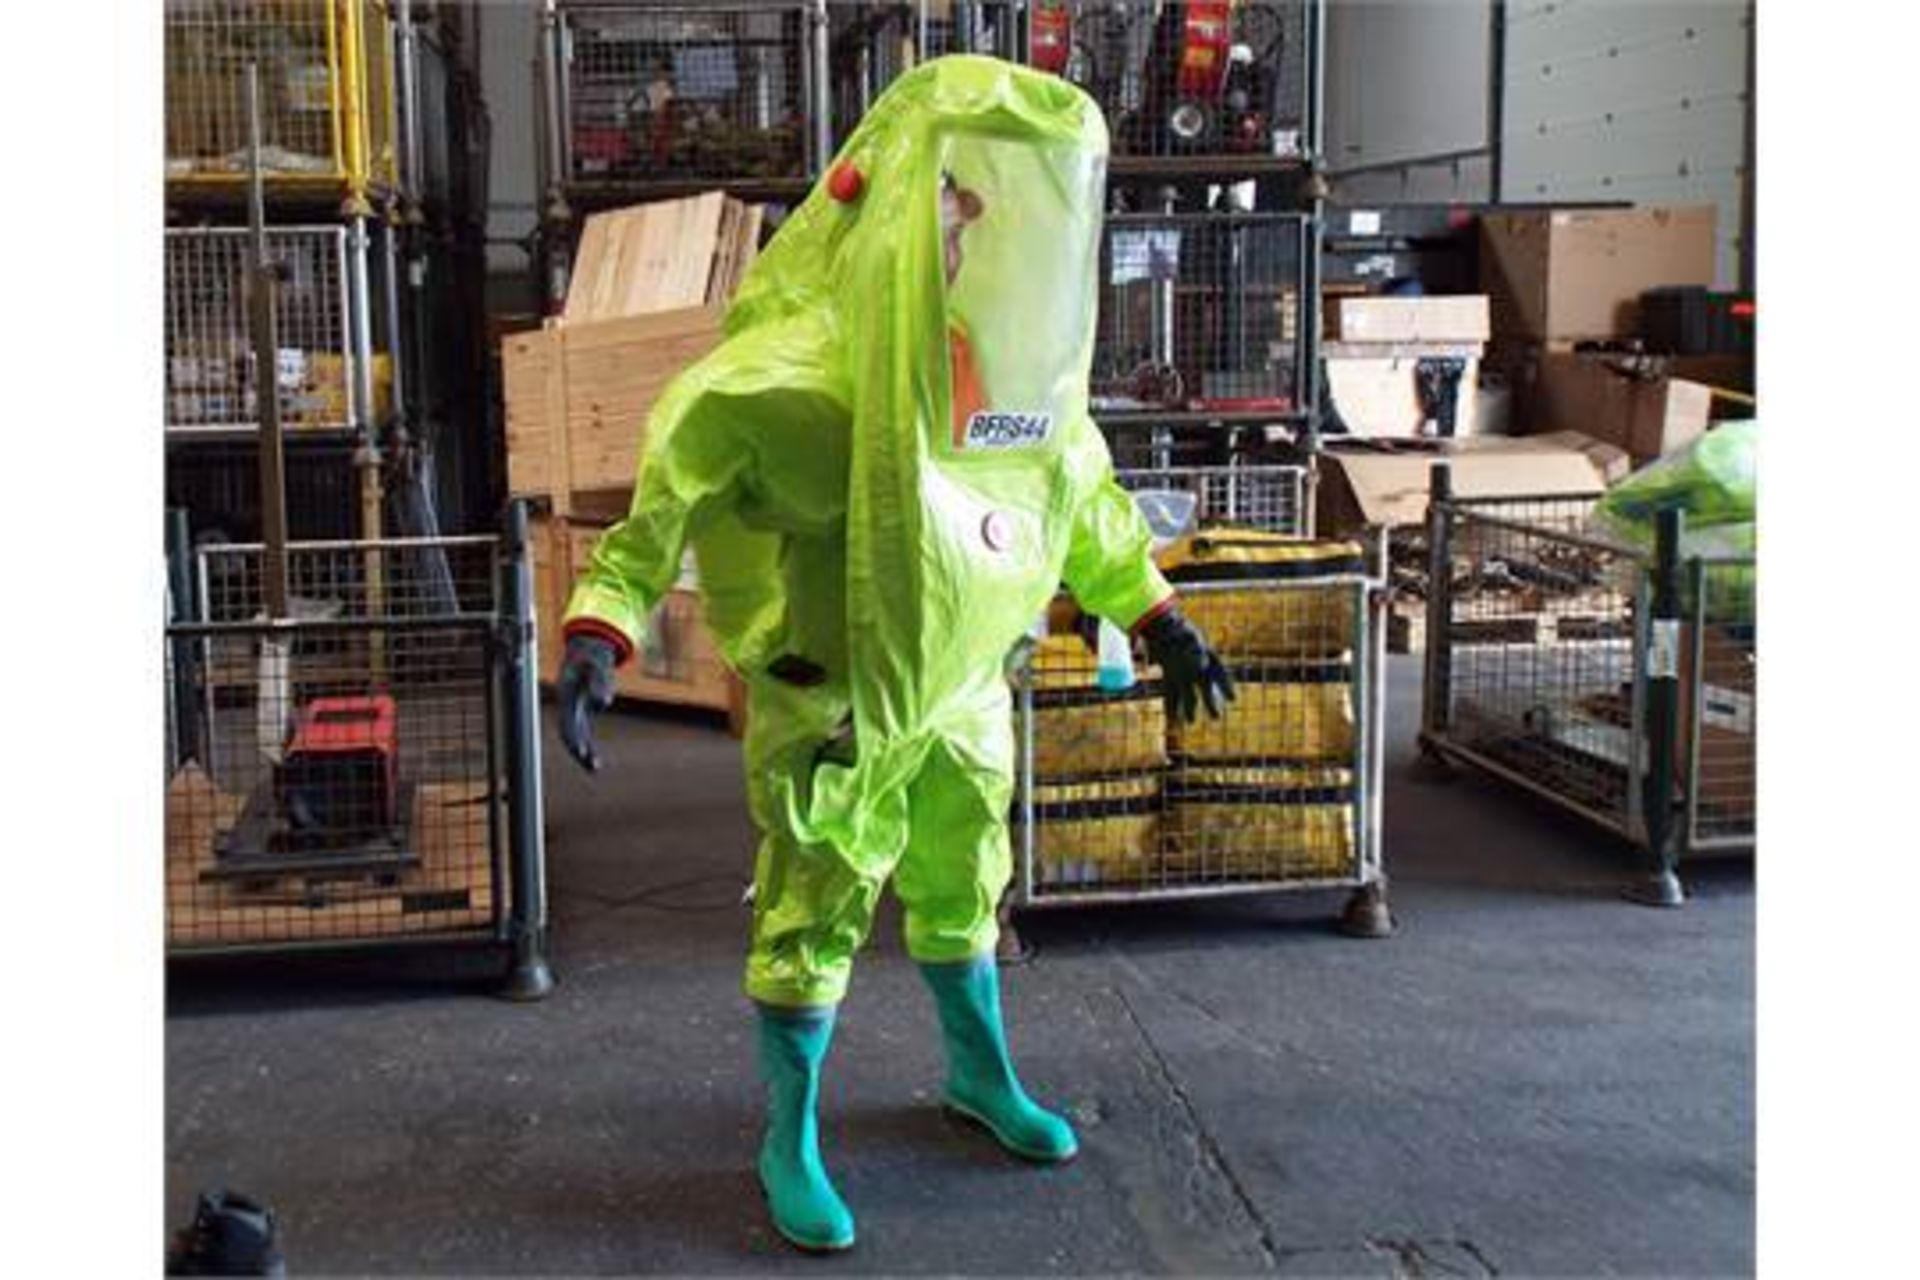 Q13 x Unissued Respirex Tychem TK Gas-Tight Hazmat Suit Type 1A with Attached Boots and Gloves - Image 4 of 12